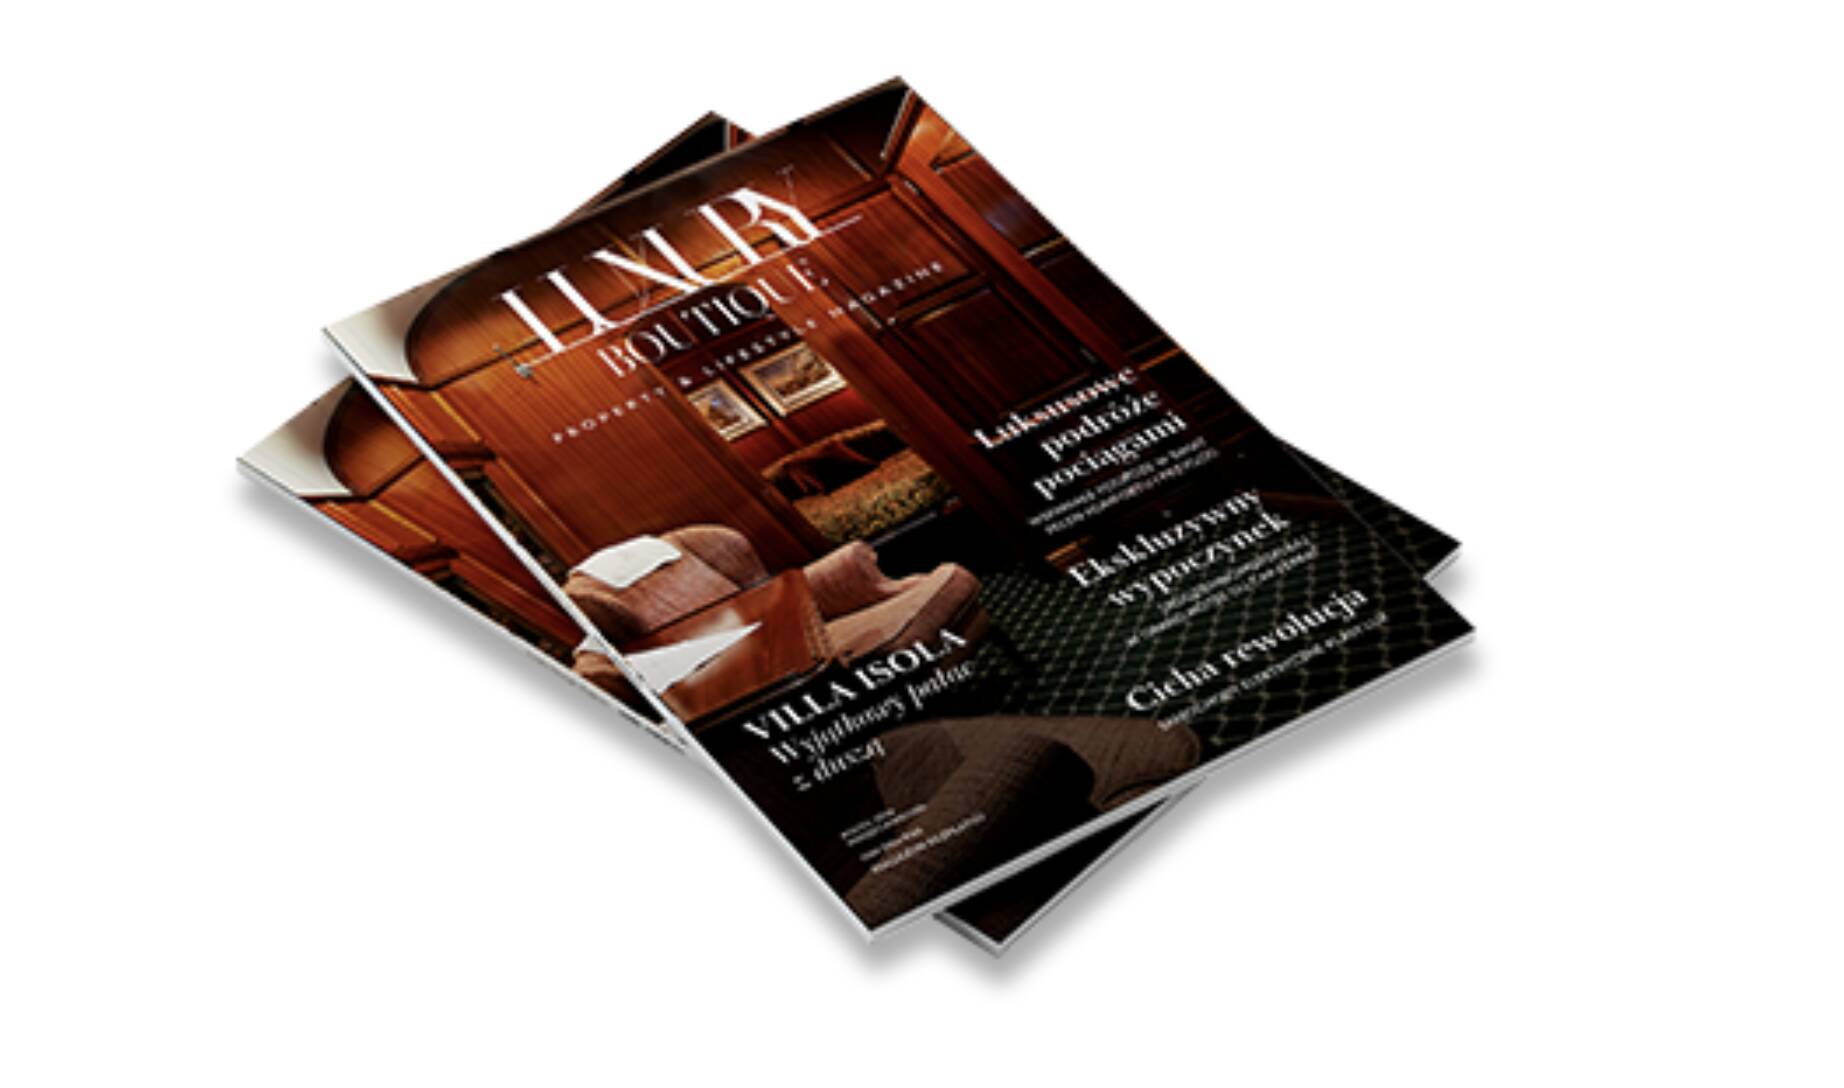 LUXURY BOUTIQUE MAGAZINE MAR/APR 24 EDITION NOW AVAILABLE!